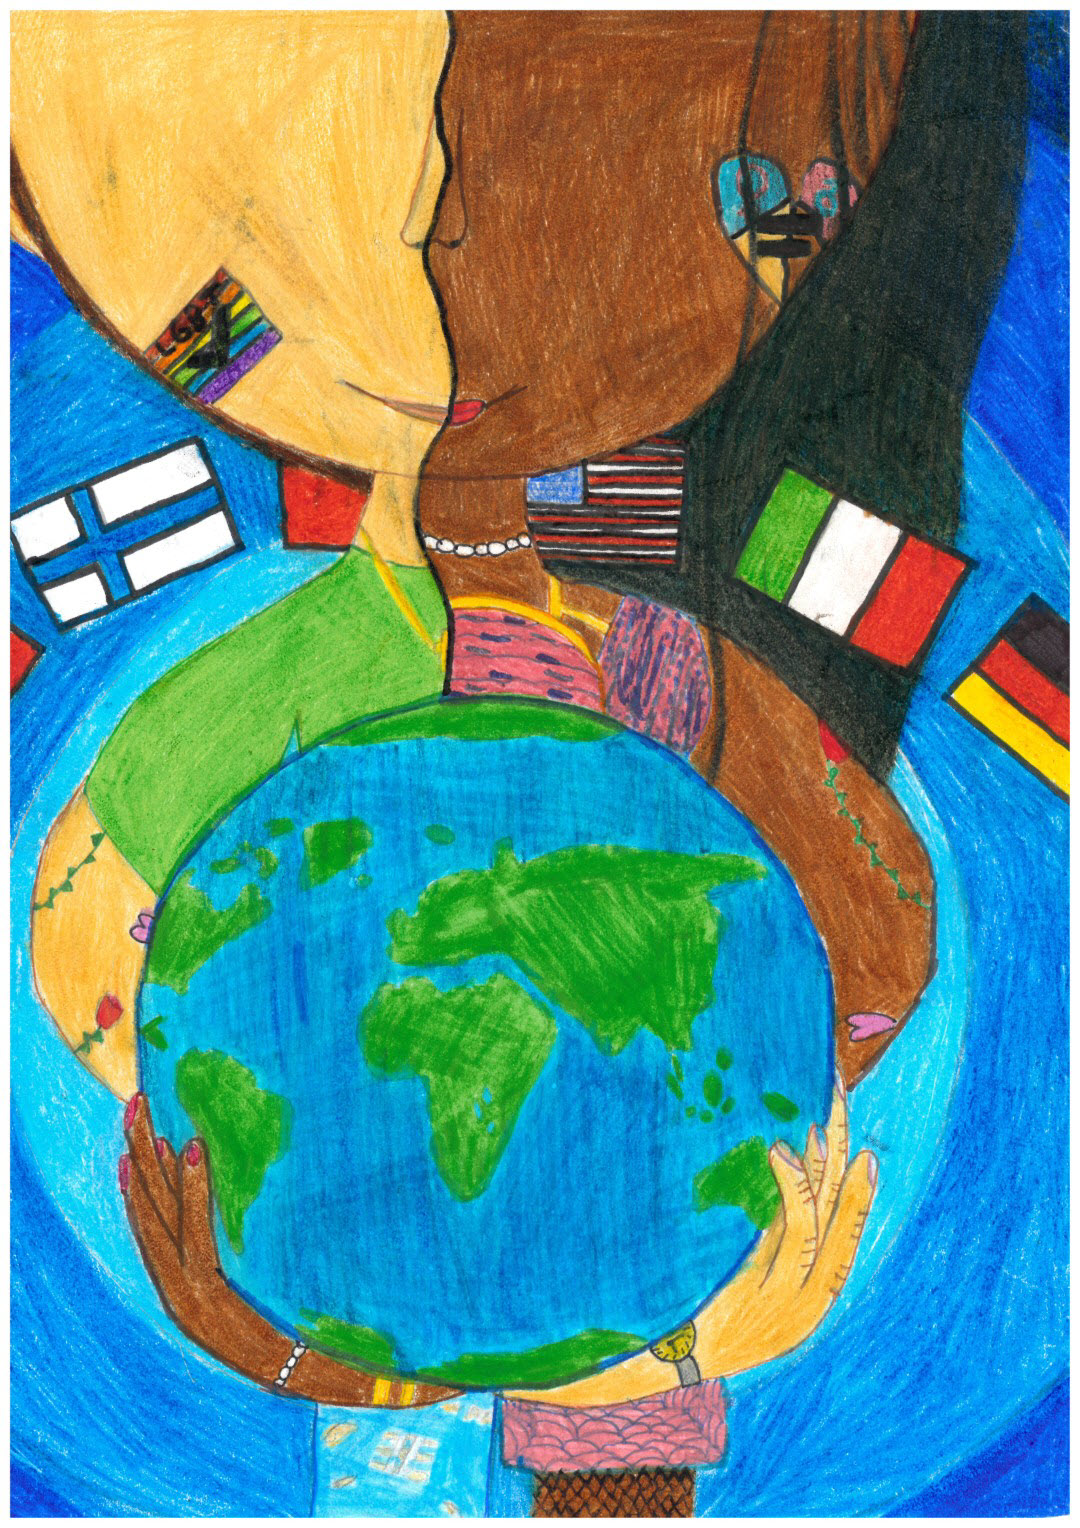 Shows two people, white and brown, holding the planet with country flags